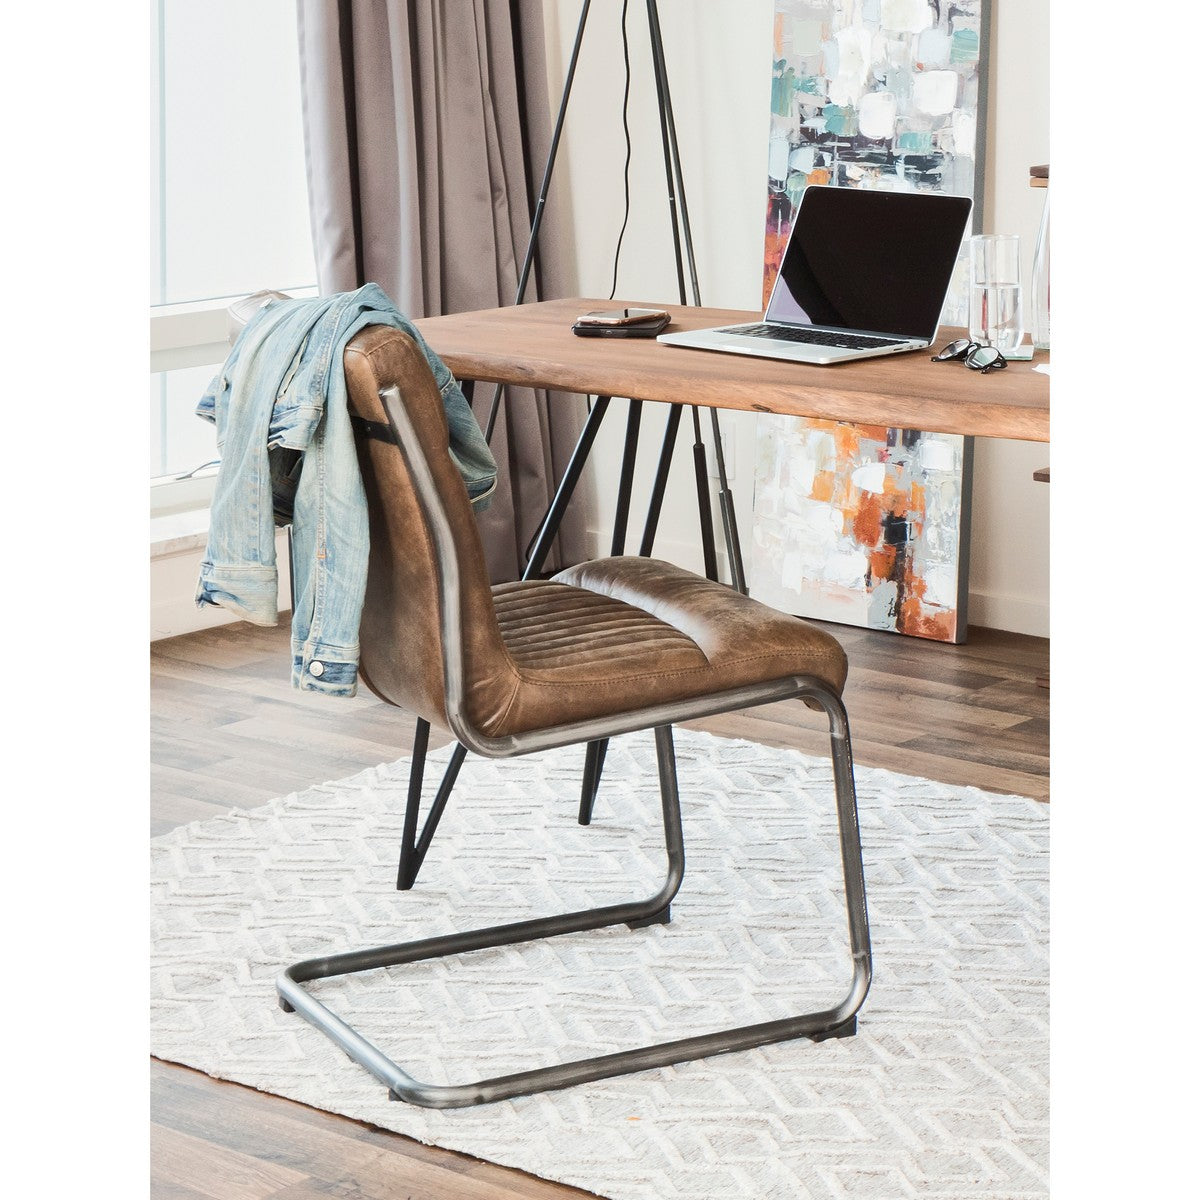 Moe's Home Collection Ansel Dining Chair Light Brown-Set of Two - PK-1043-03 - Moe's Home Collection - Dining Chairs - Minimal And Modern - 1